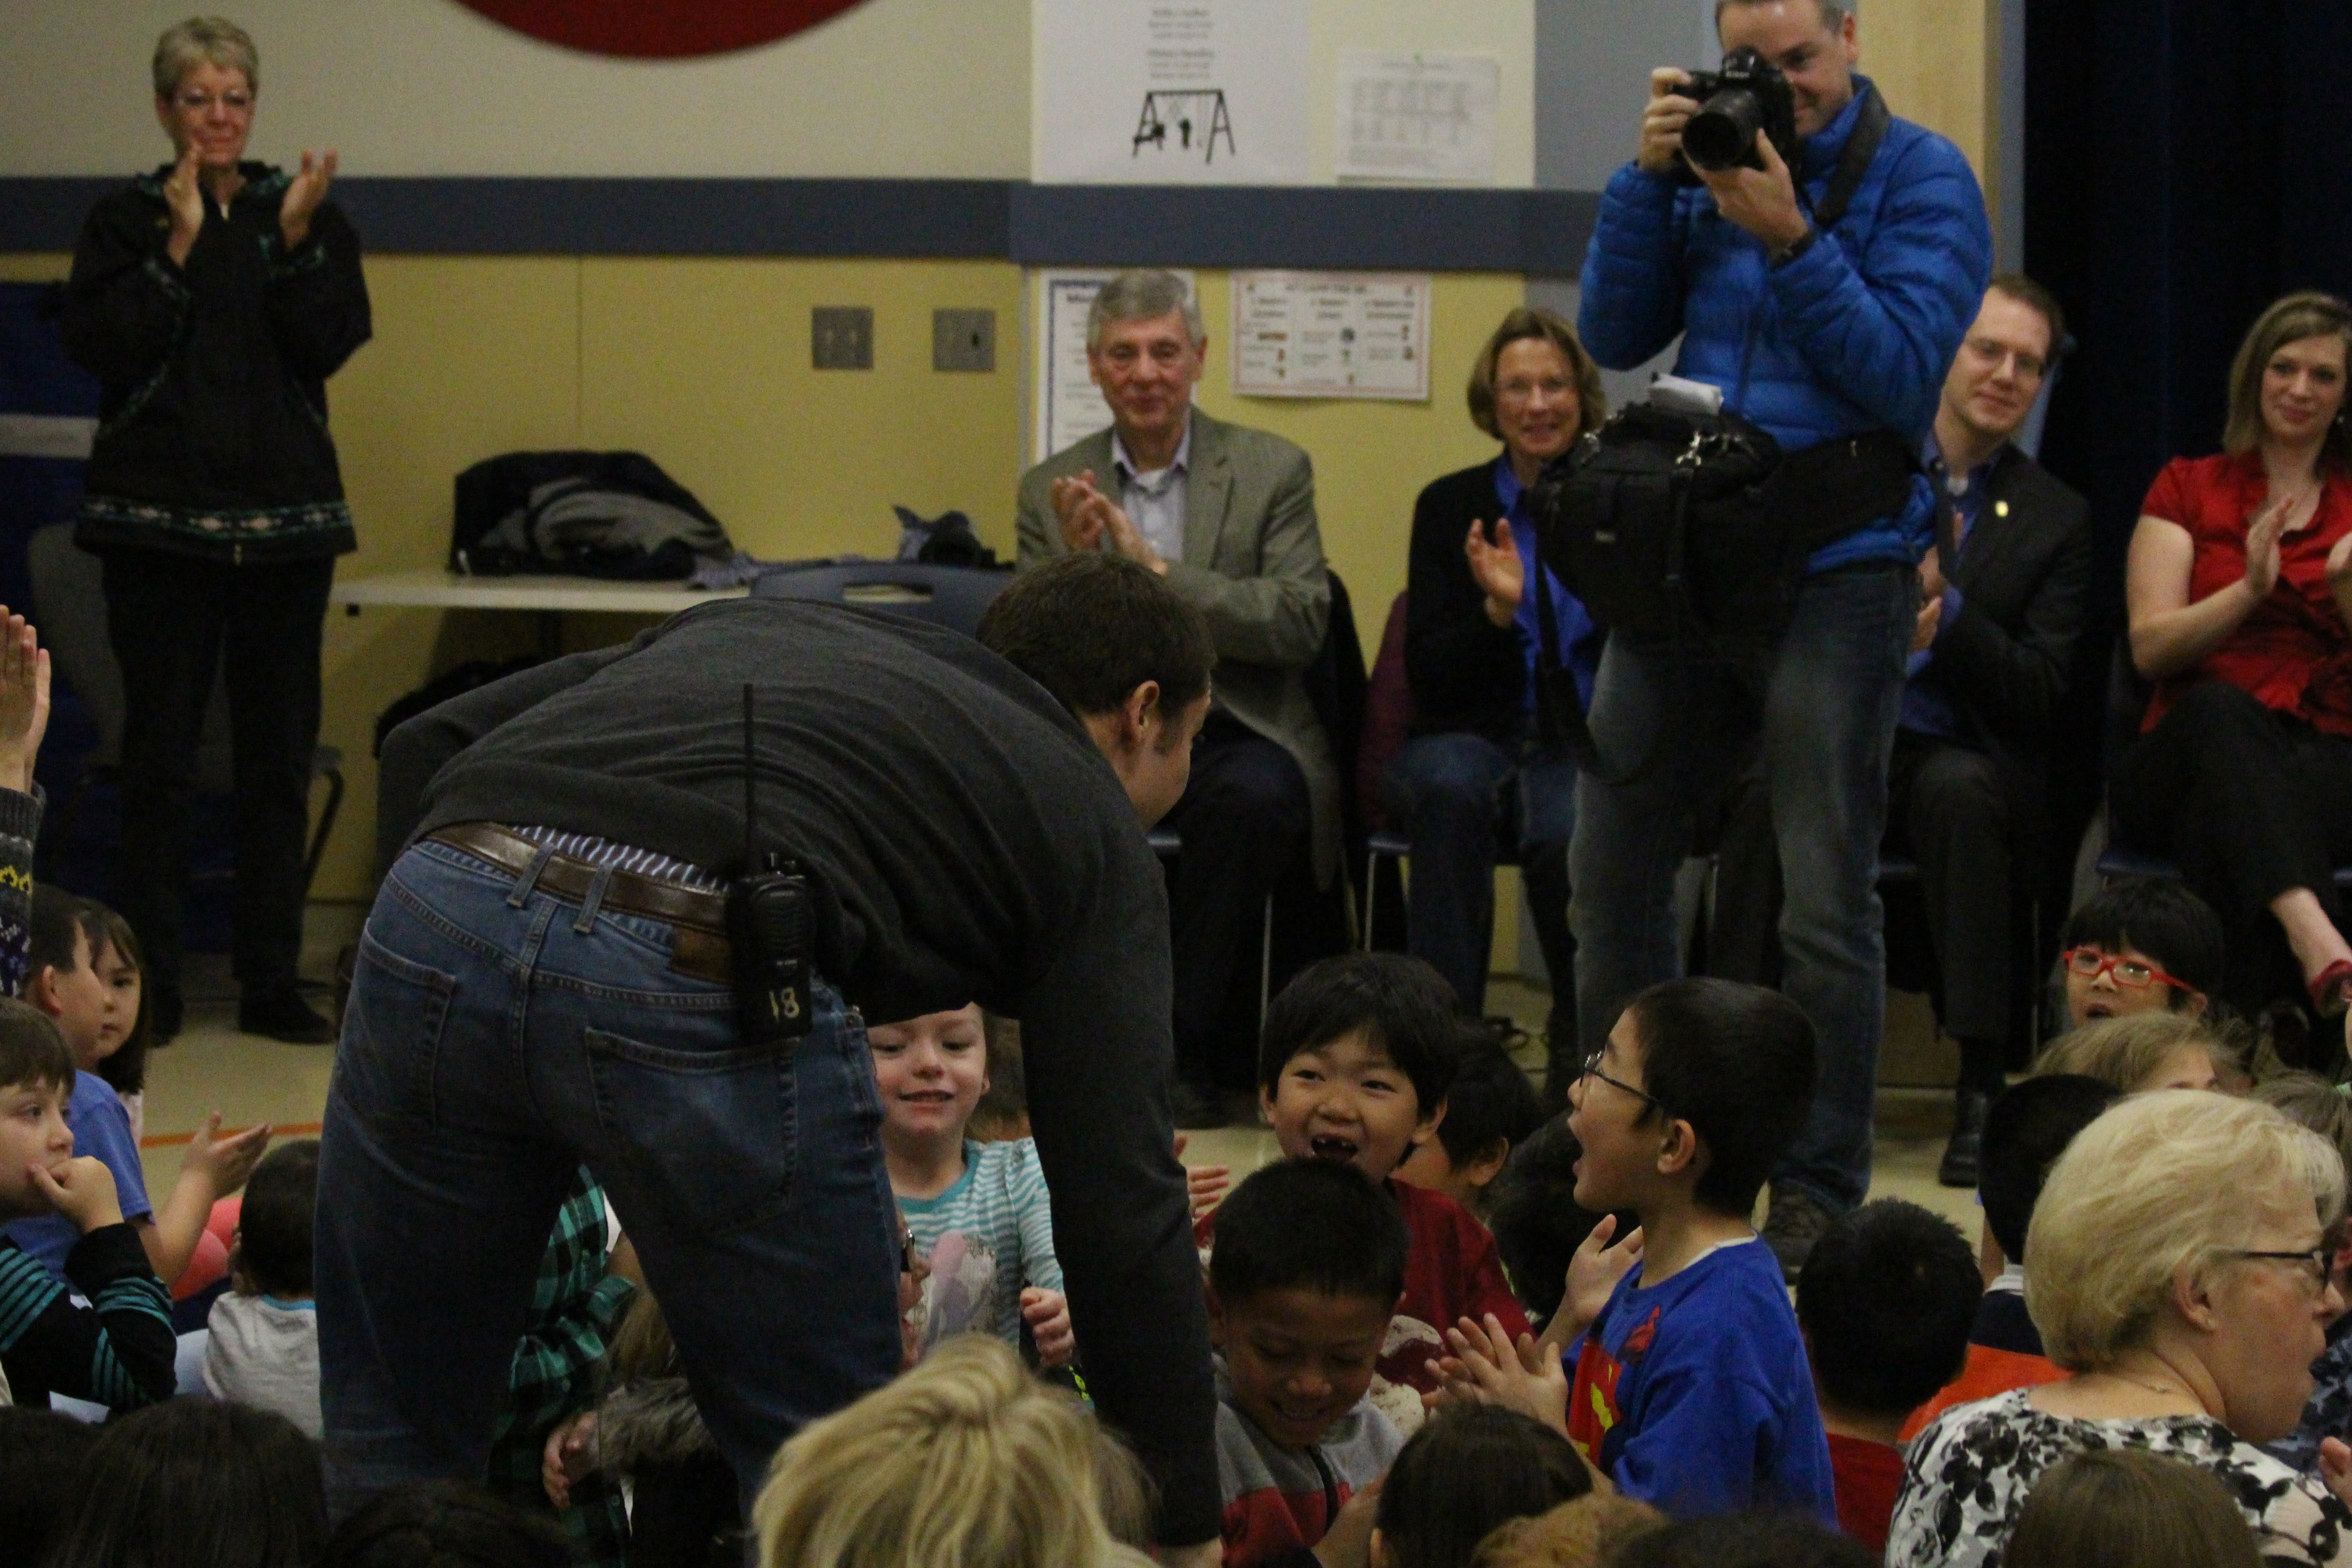 Paul Campbell right after he was announced as a Milken Educator Award recipient. He was sitting with his students moments earlier. (Photo by Wesley Early, Alaska Public Media - Anchorage)